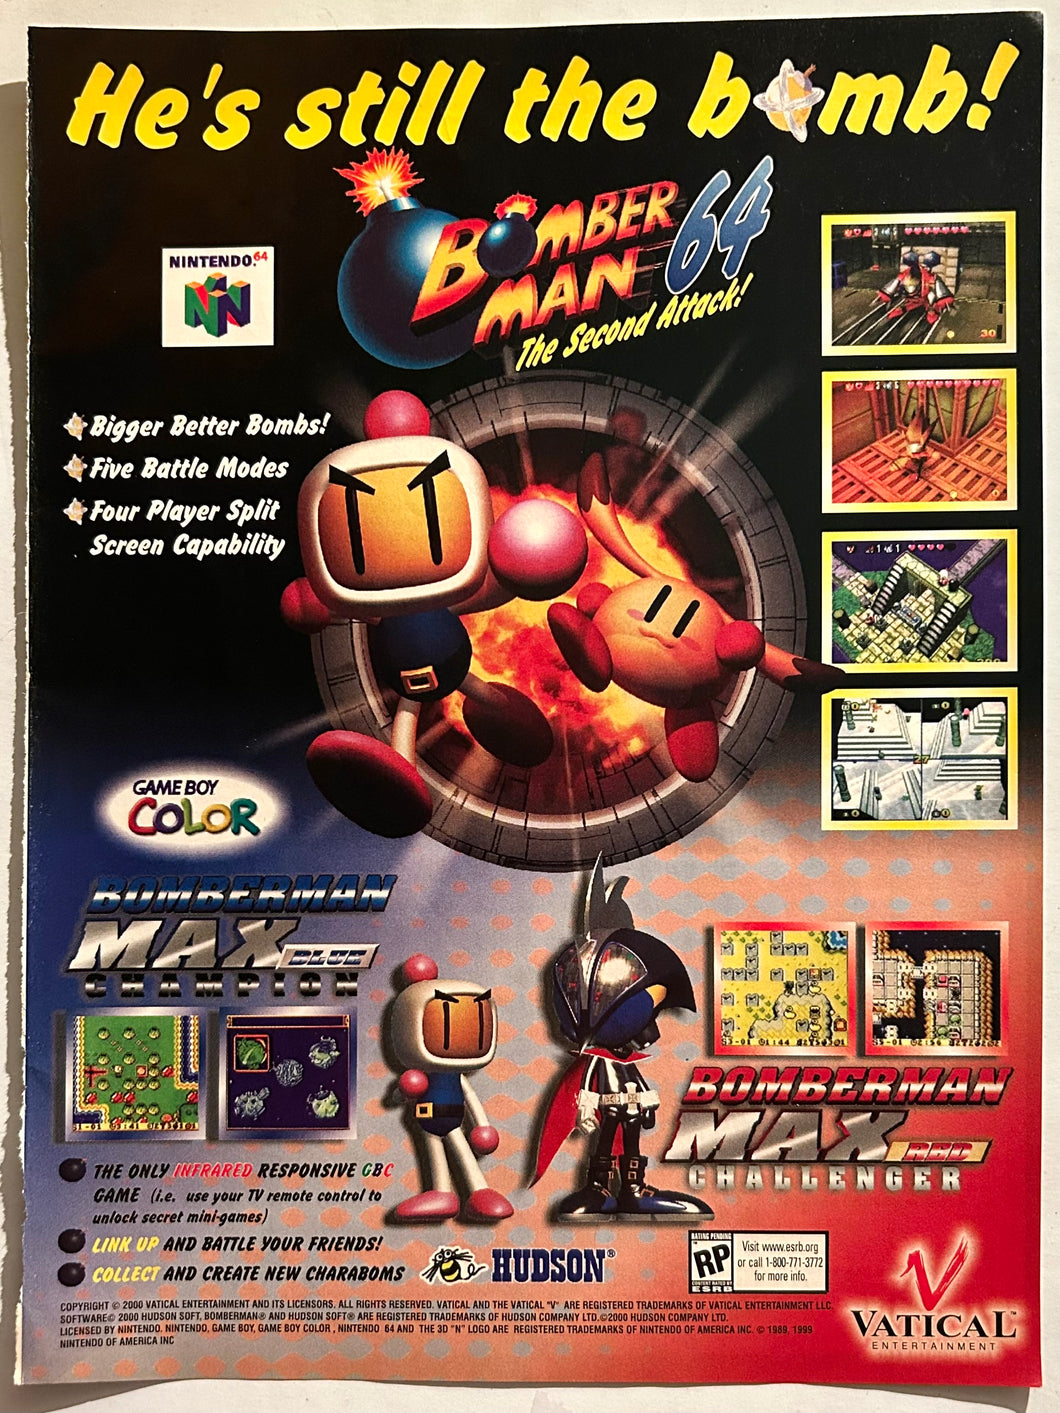 Bomberman 64: The Second Attack - N64 GBC - Original Vintage Advertisement - Print Ads - Laminated A4 Poster